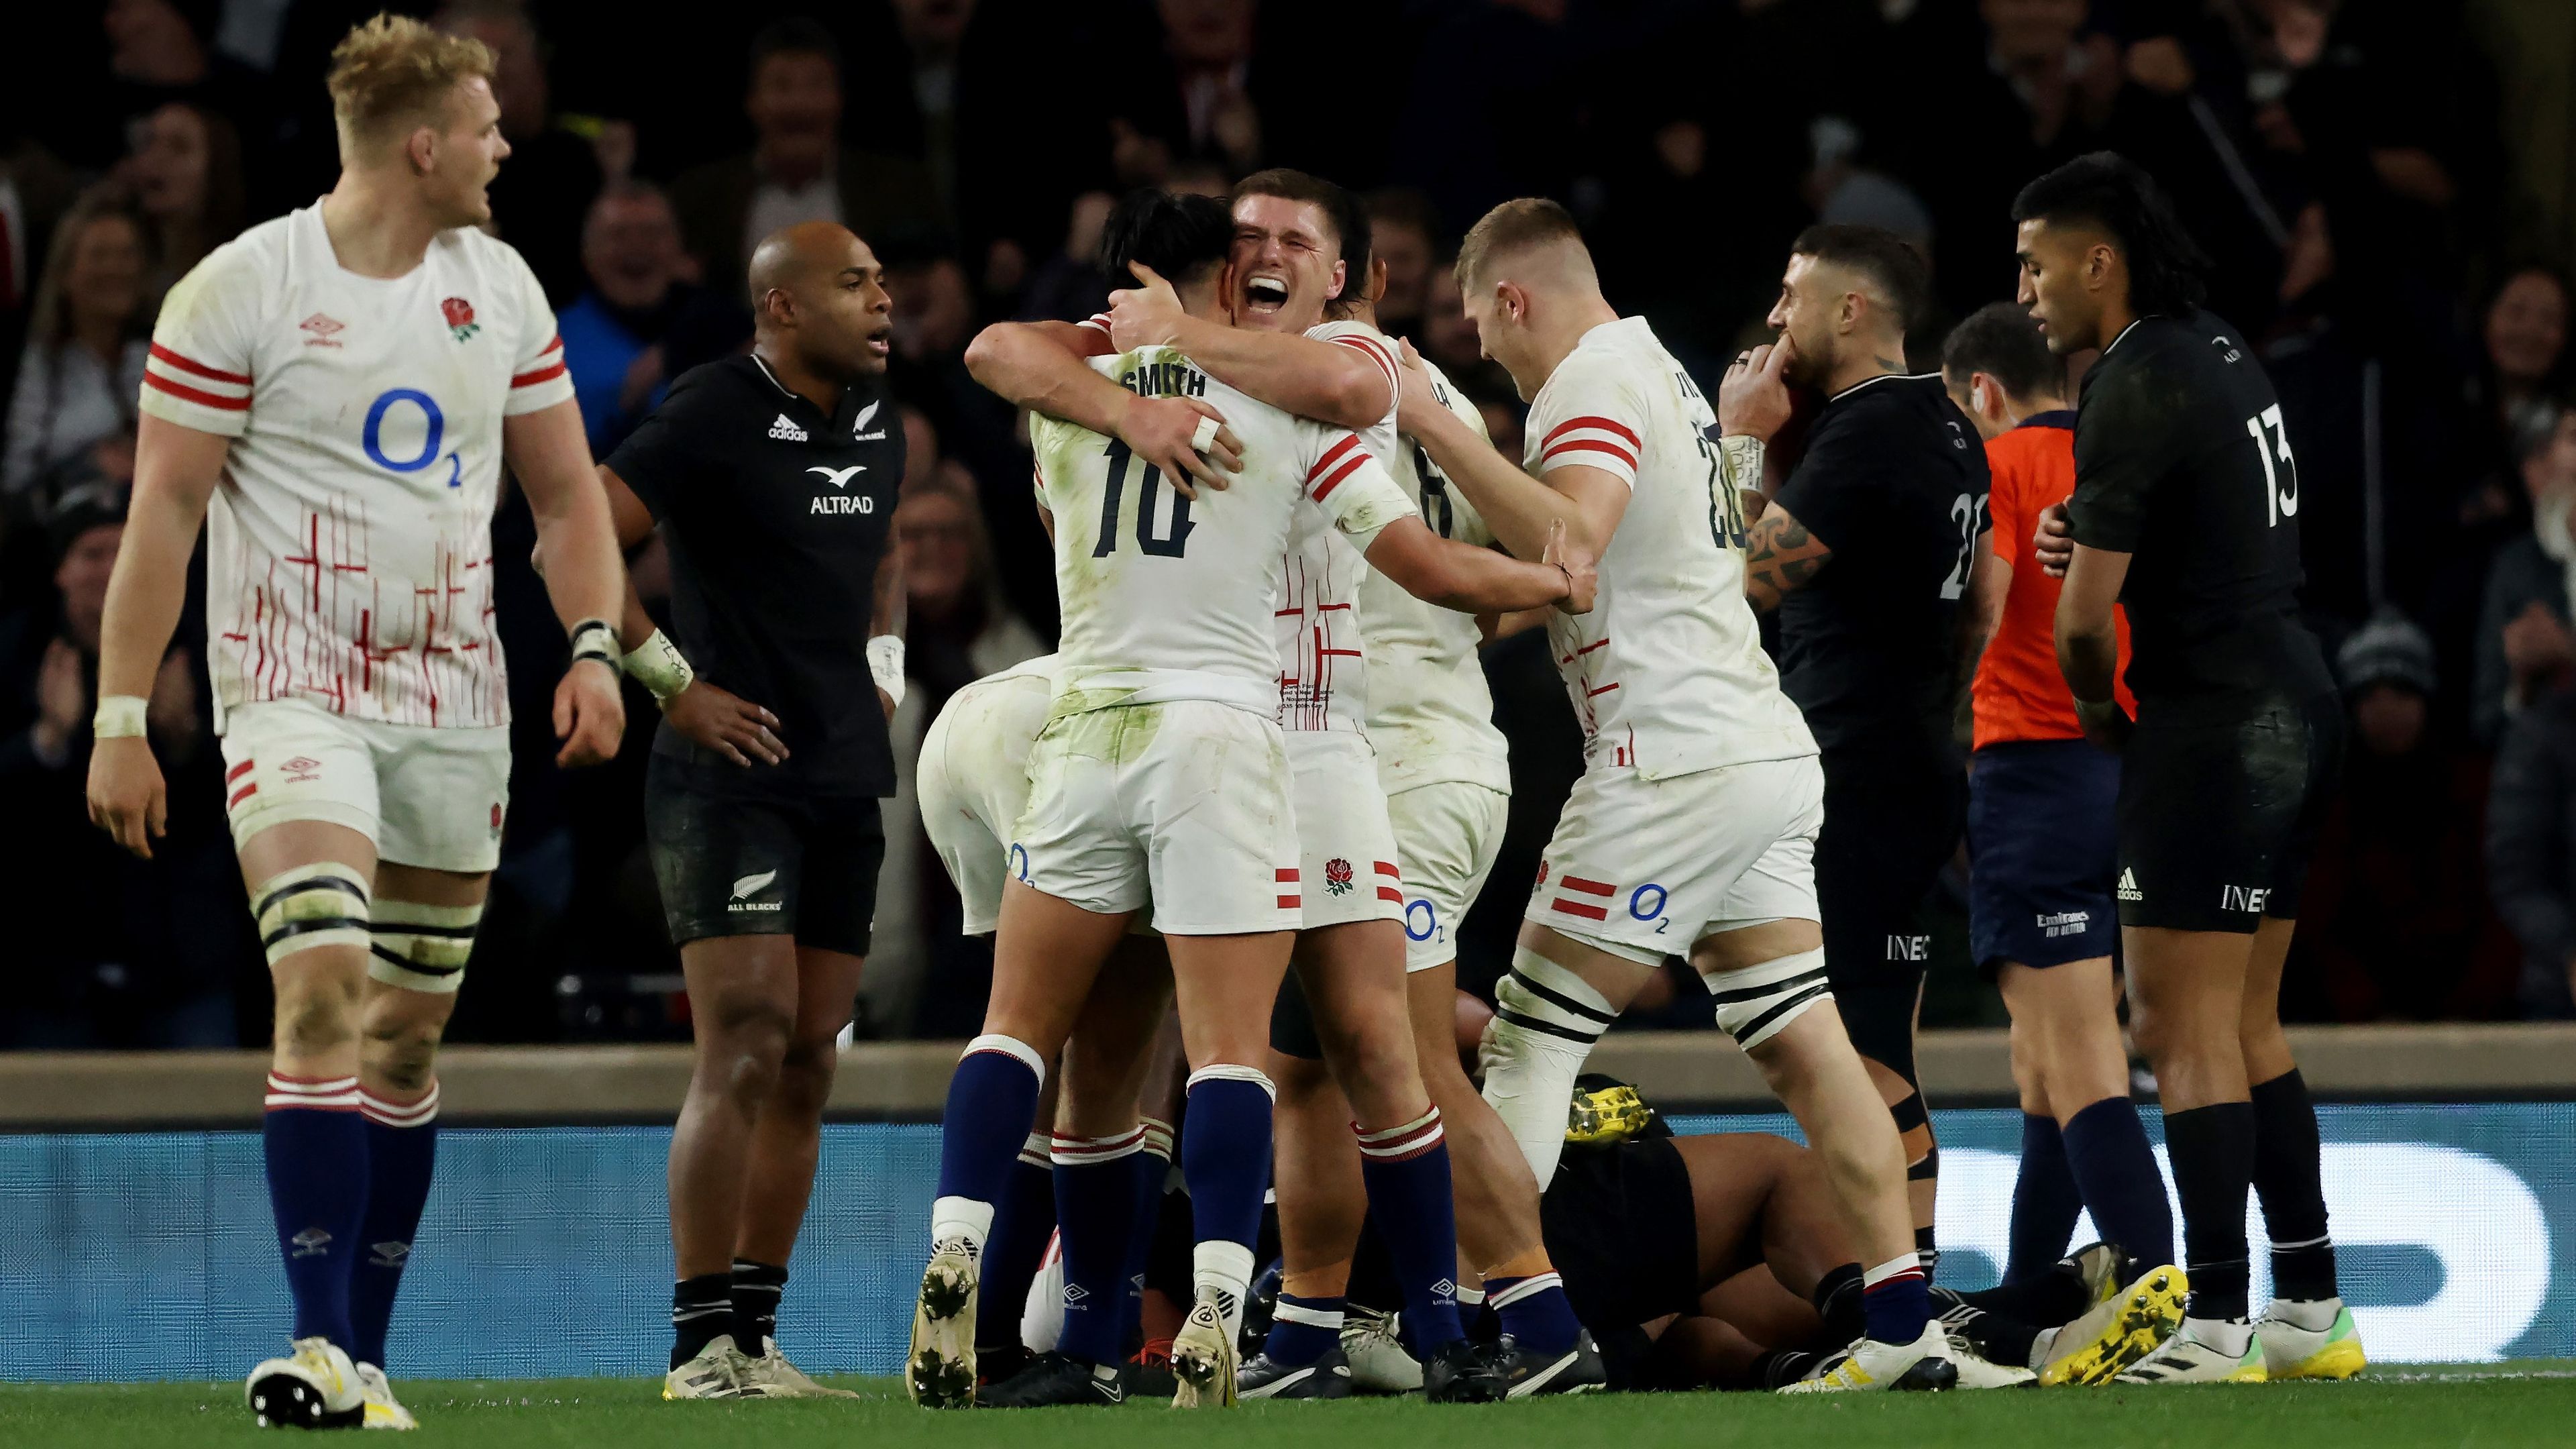 Marcus Smith and Owen Farrell of England celebrate their third try over New Zealand at Twickenham Stadium.